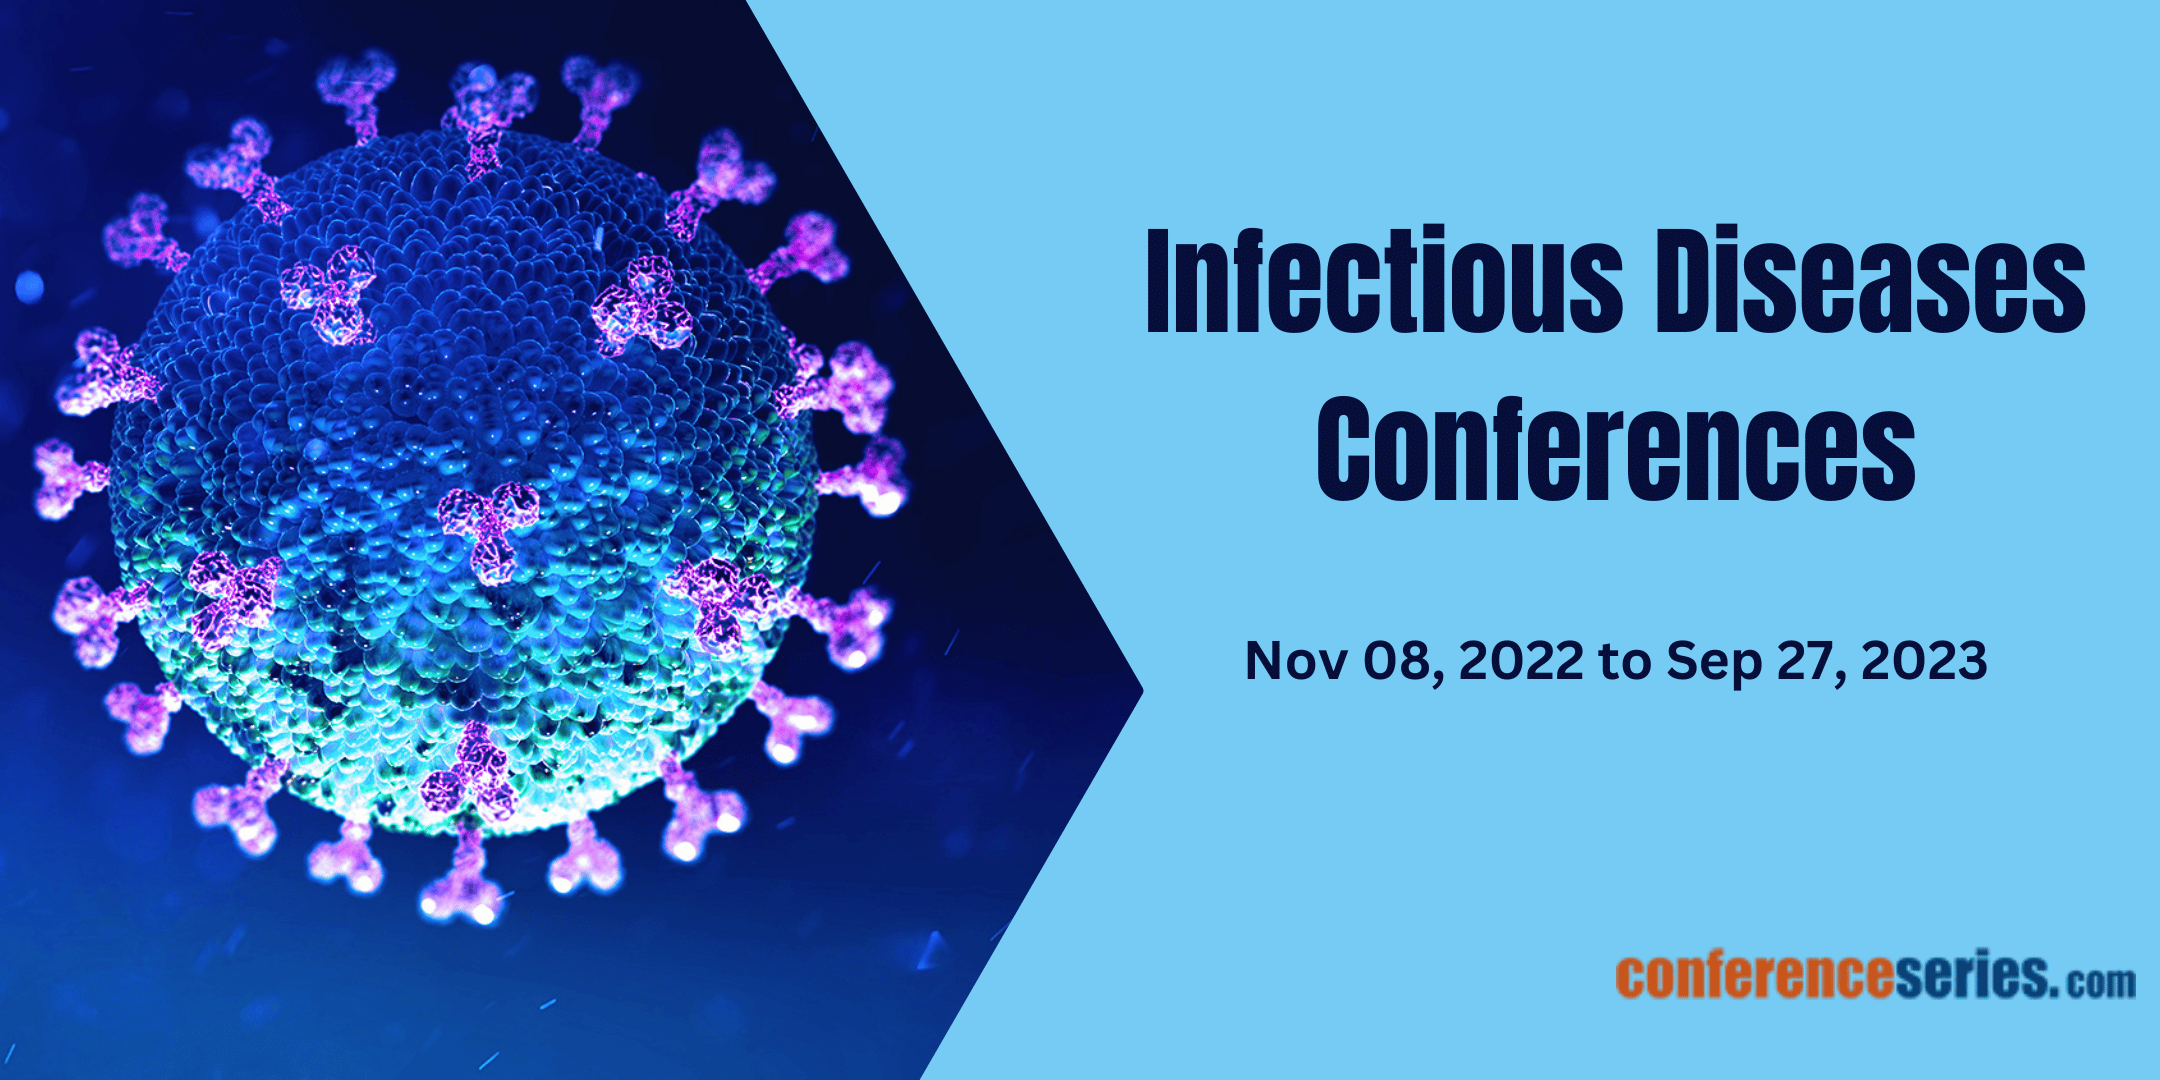 Infectious diseases conferences